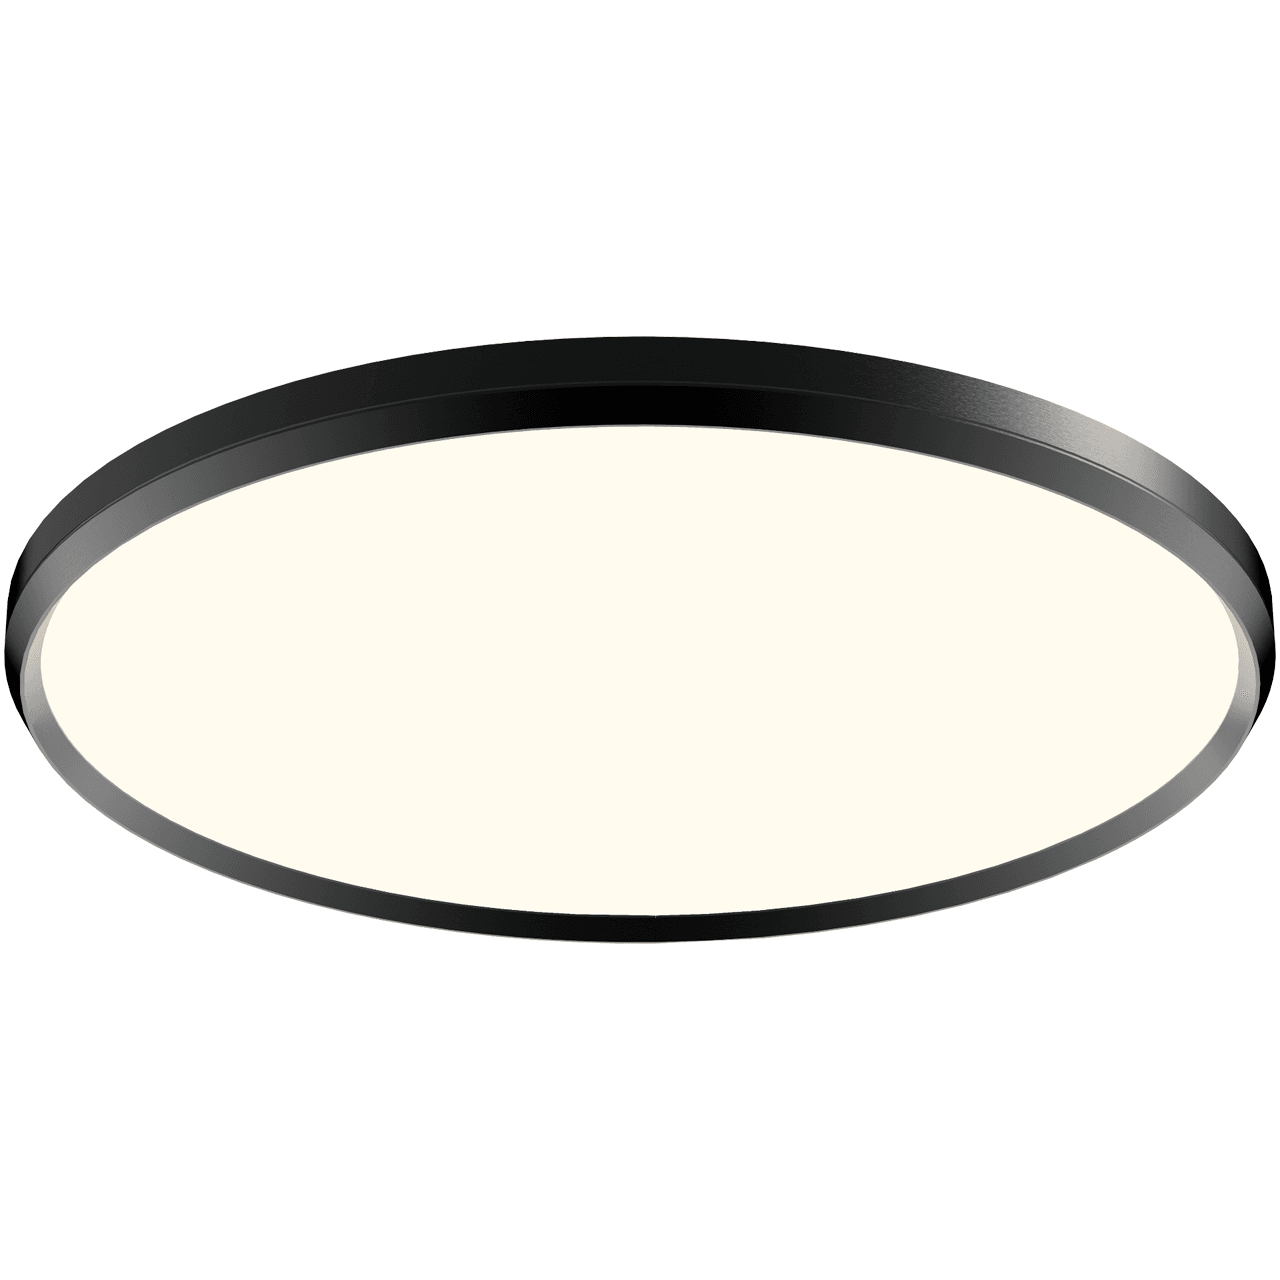 Pageone - Skylight (Round 29.5"Dia.). Ceiling. Flush Mount - Hbdepot